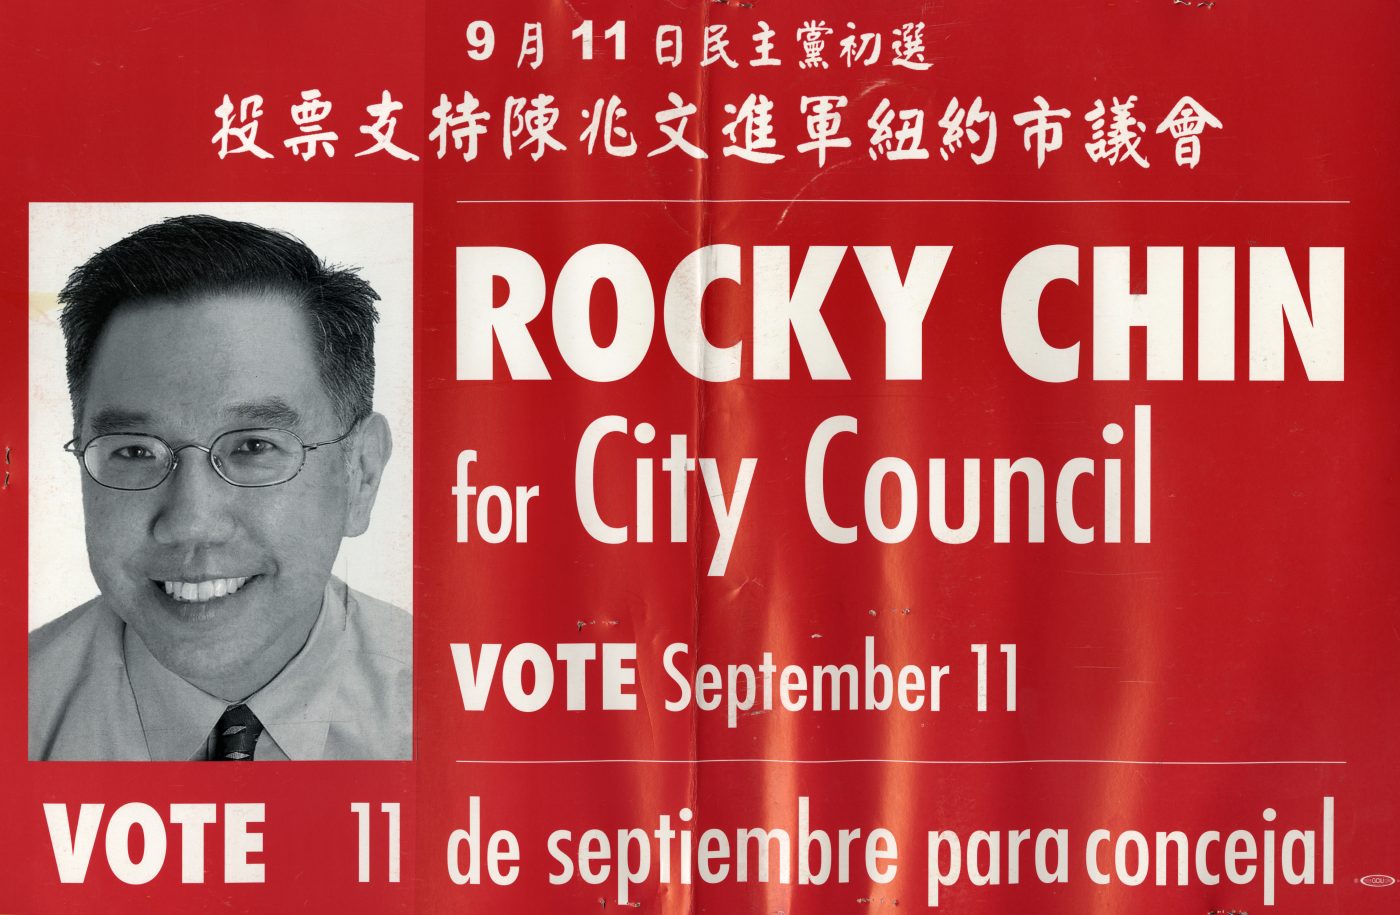 14 October 2019 Posted.
Rocky Chin for City Council Election Poster, 2001, Courtesy of Rocky Chin, Museum of Chinese in America (MOCA) Collection.
陈兆文竞选市议员的海报，2001年，陈兆文捐赠，美国华人博物馆（MOCA）馆藏